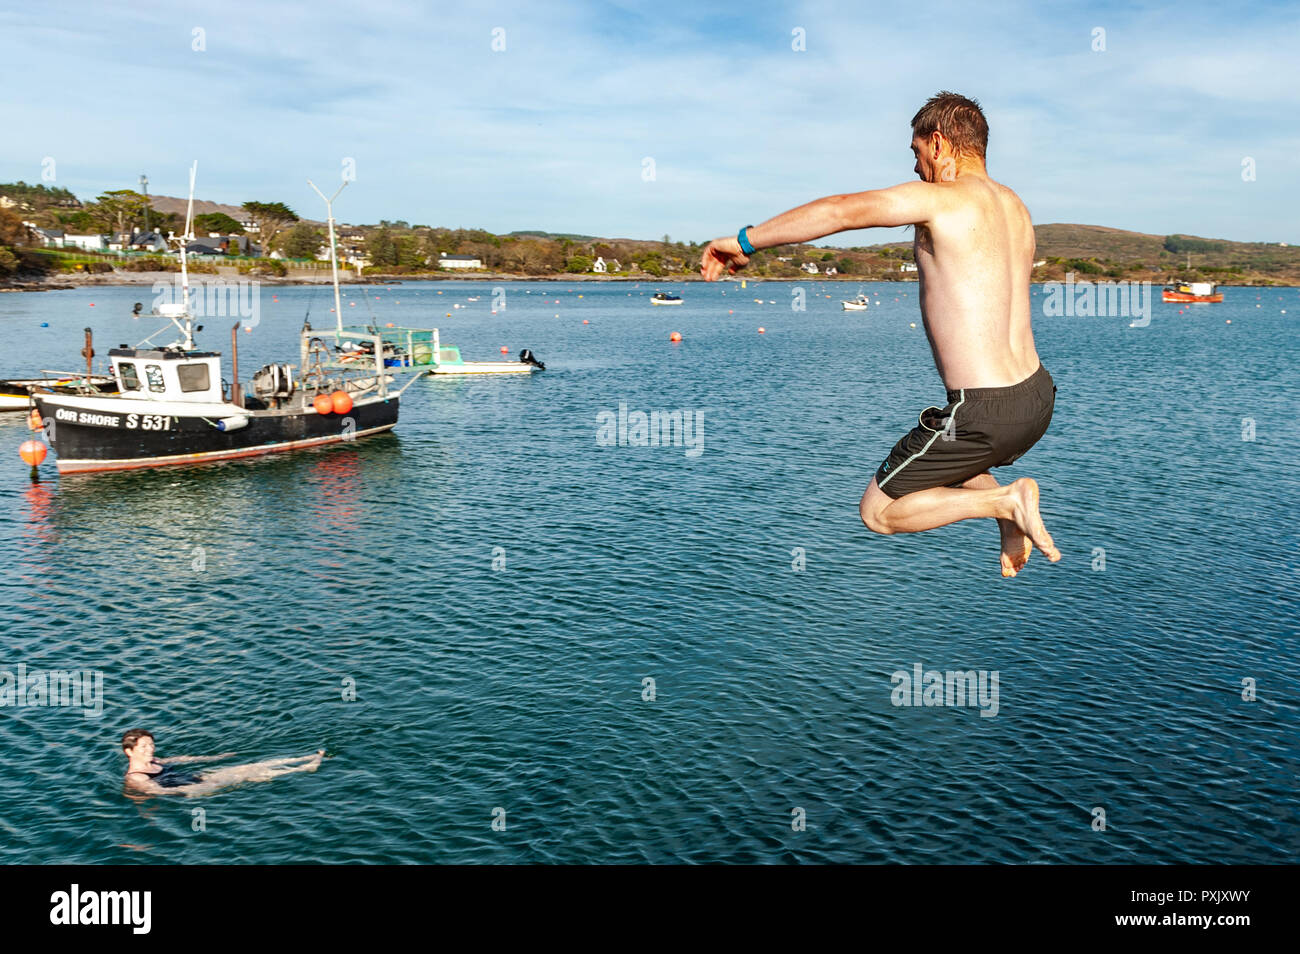 Schull, West Cork, Ireland. 23rd Oct, 2018.  Clinton Copithorne from Ballydehob makes the most of the unseasonably warm weather by jumping into the sea off Schull Pier. Sunshine has been the order of the day today with highs of 13-15° Celsius in West Cork. Credit: Andy Gibson/Alamy Live News. Stock Photo